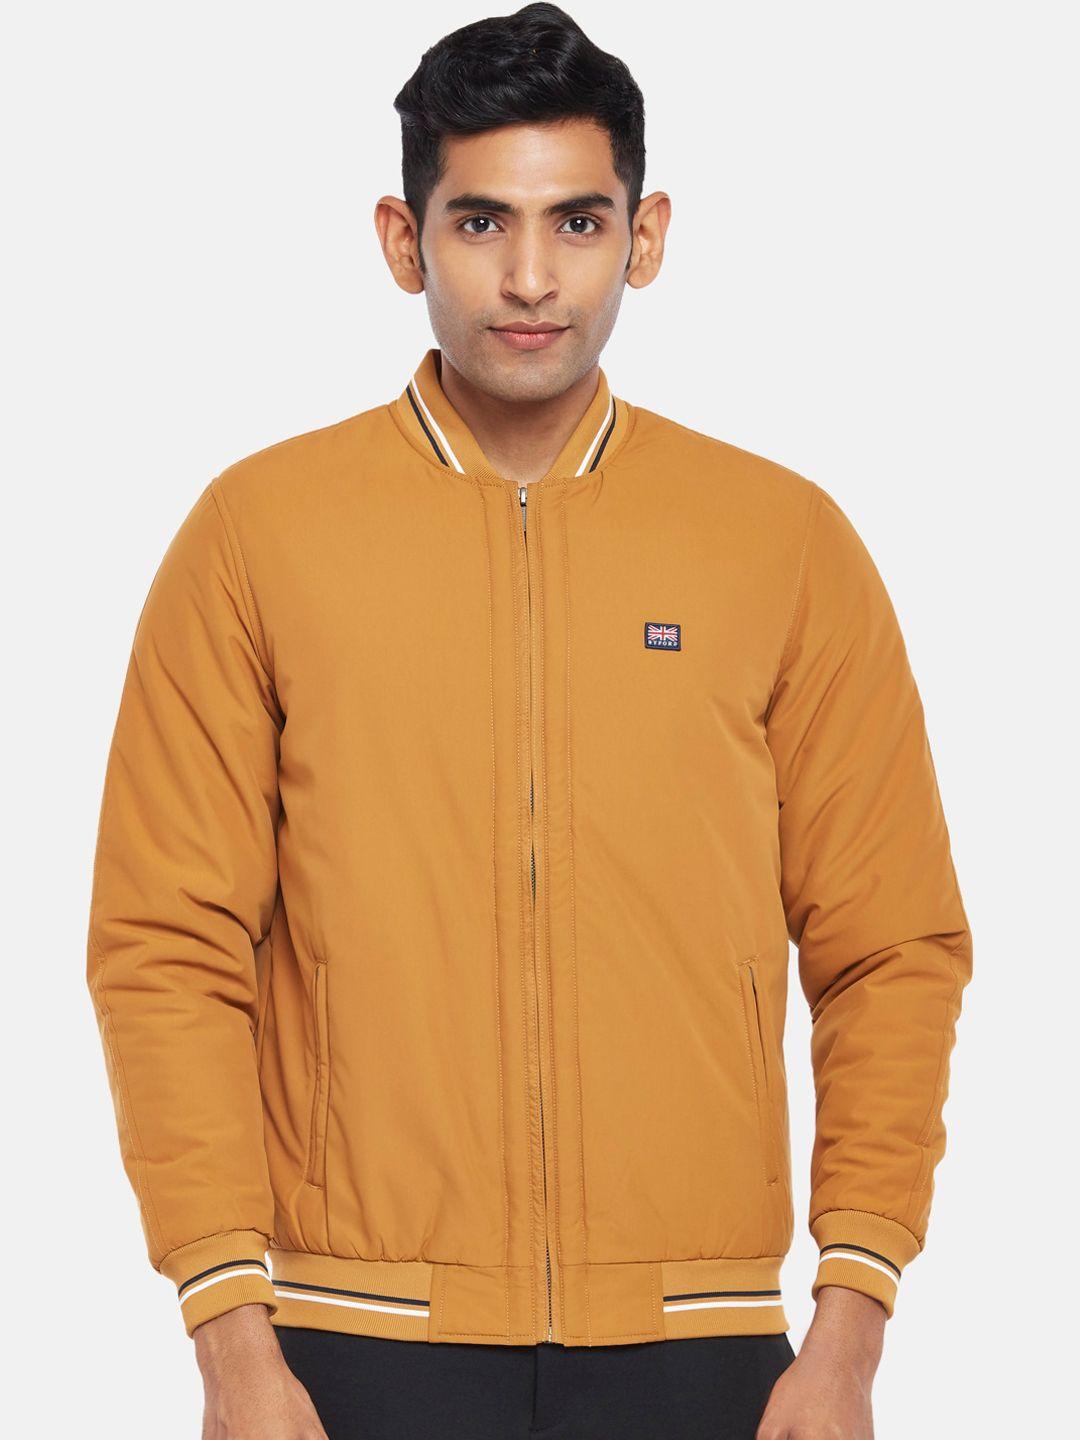 byford-by-pantaloons-men-mustard-yellow-solid-outdoor-bomber-jacket